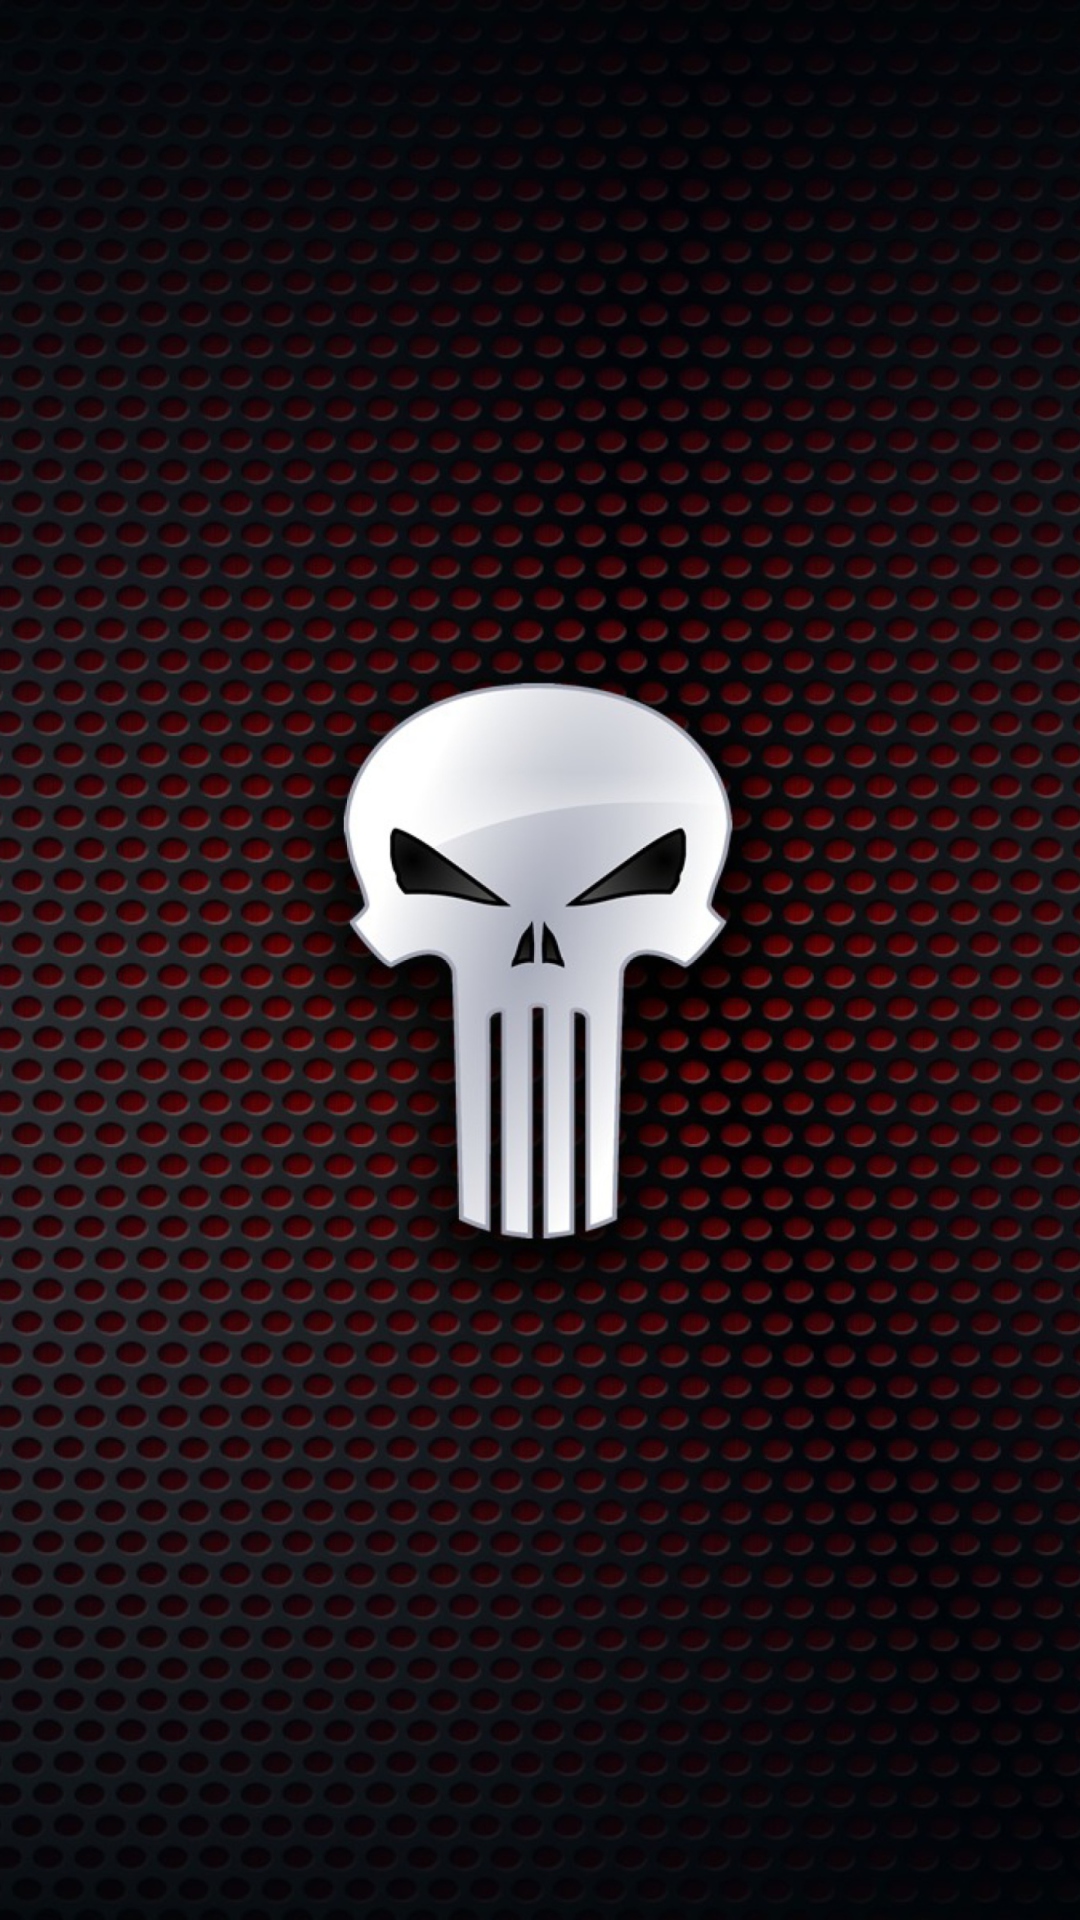 The Punisher, Marvel Comics Wallpaper for iPhone 7 Plus.